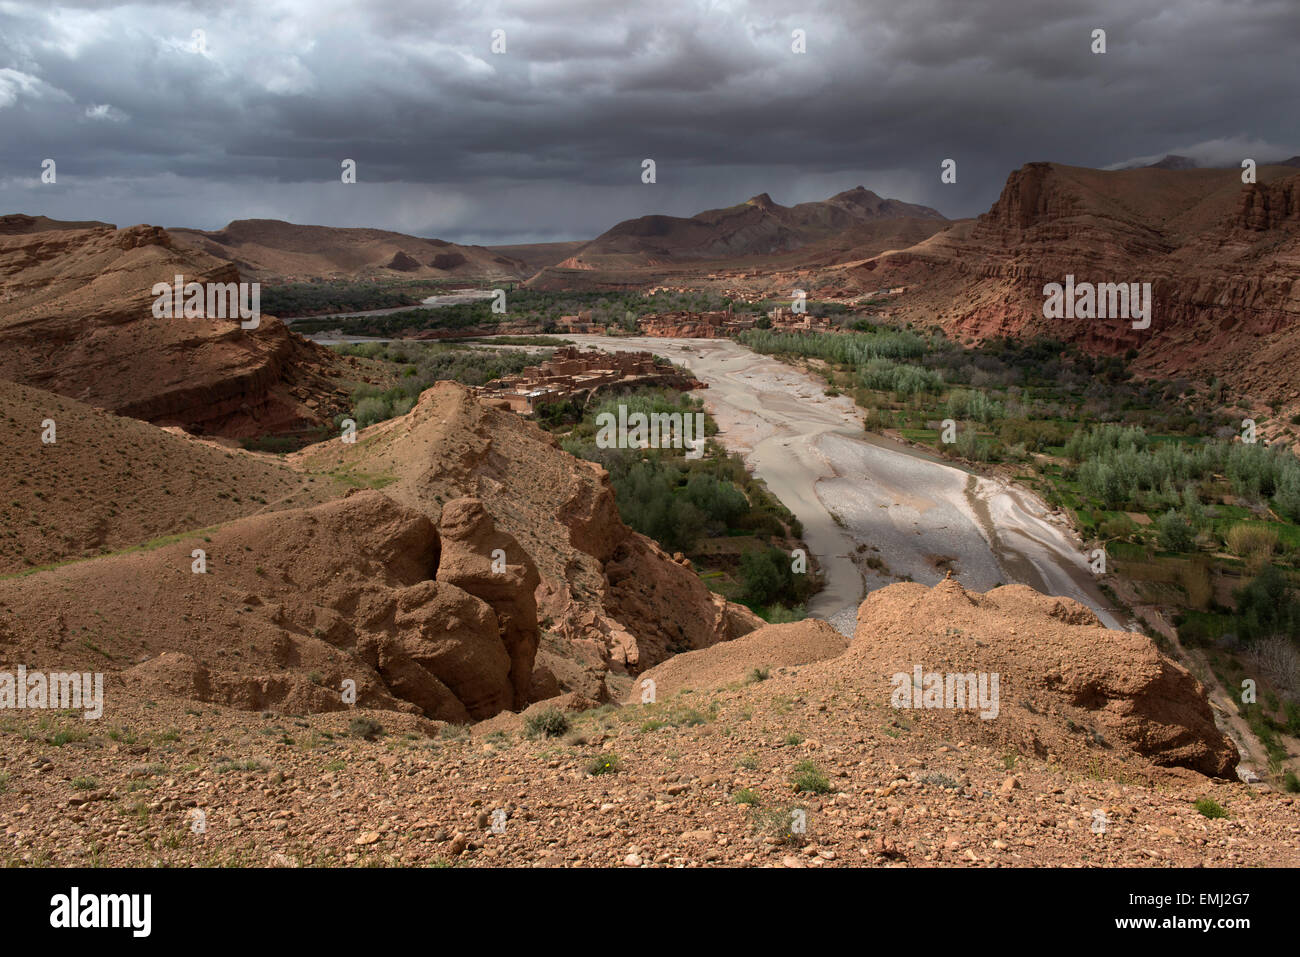 Overview of Kelaa M'Gouna, on Dades River.  Conglomerate, classic sedimentary rock, in High Atlas Mountains, Morocco.  Ourzazate Stock Photo